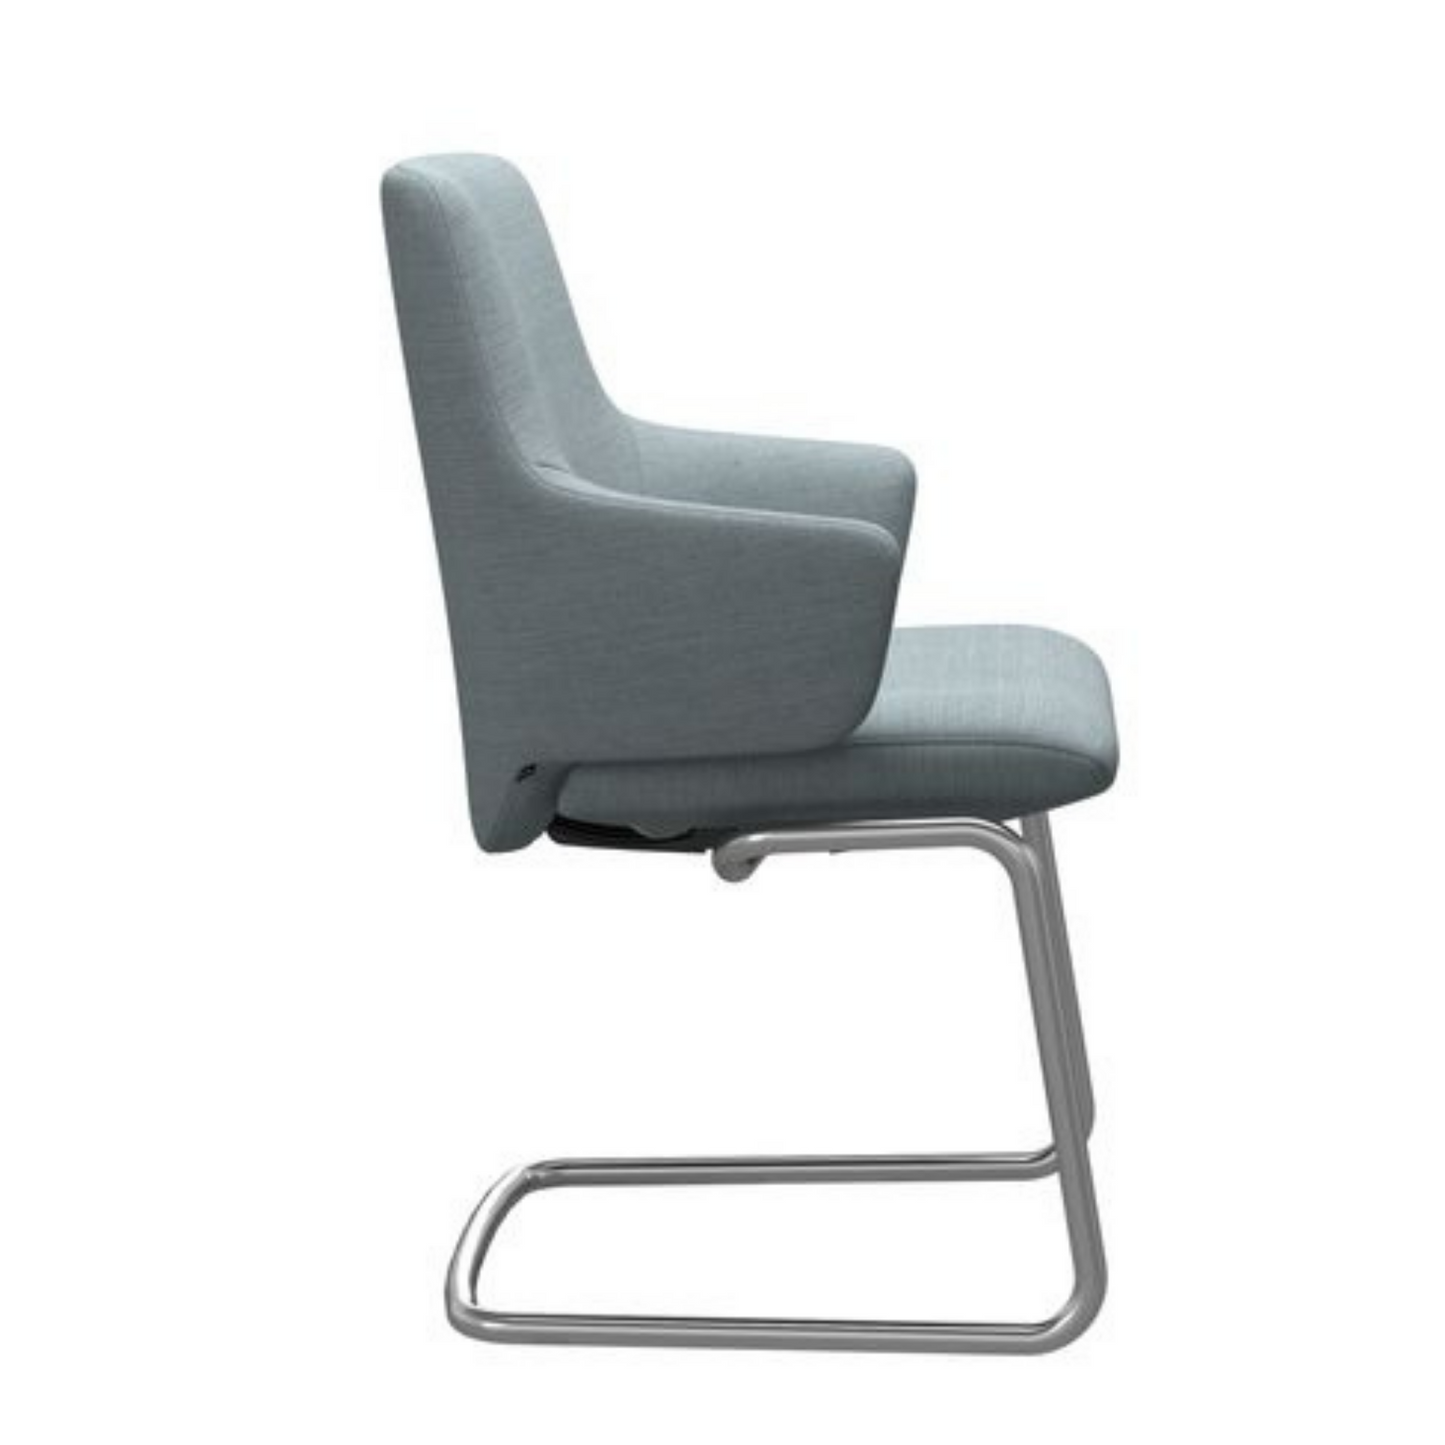 Laurel Dining Chair with Arms D400 Leg by Stressless